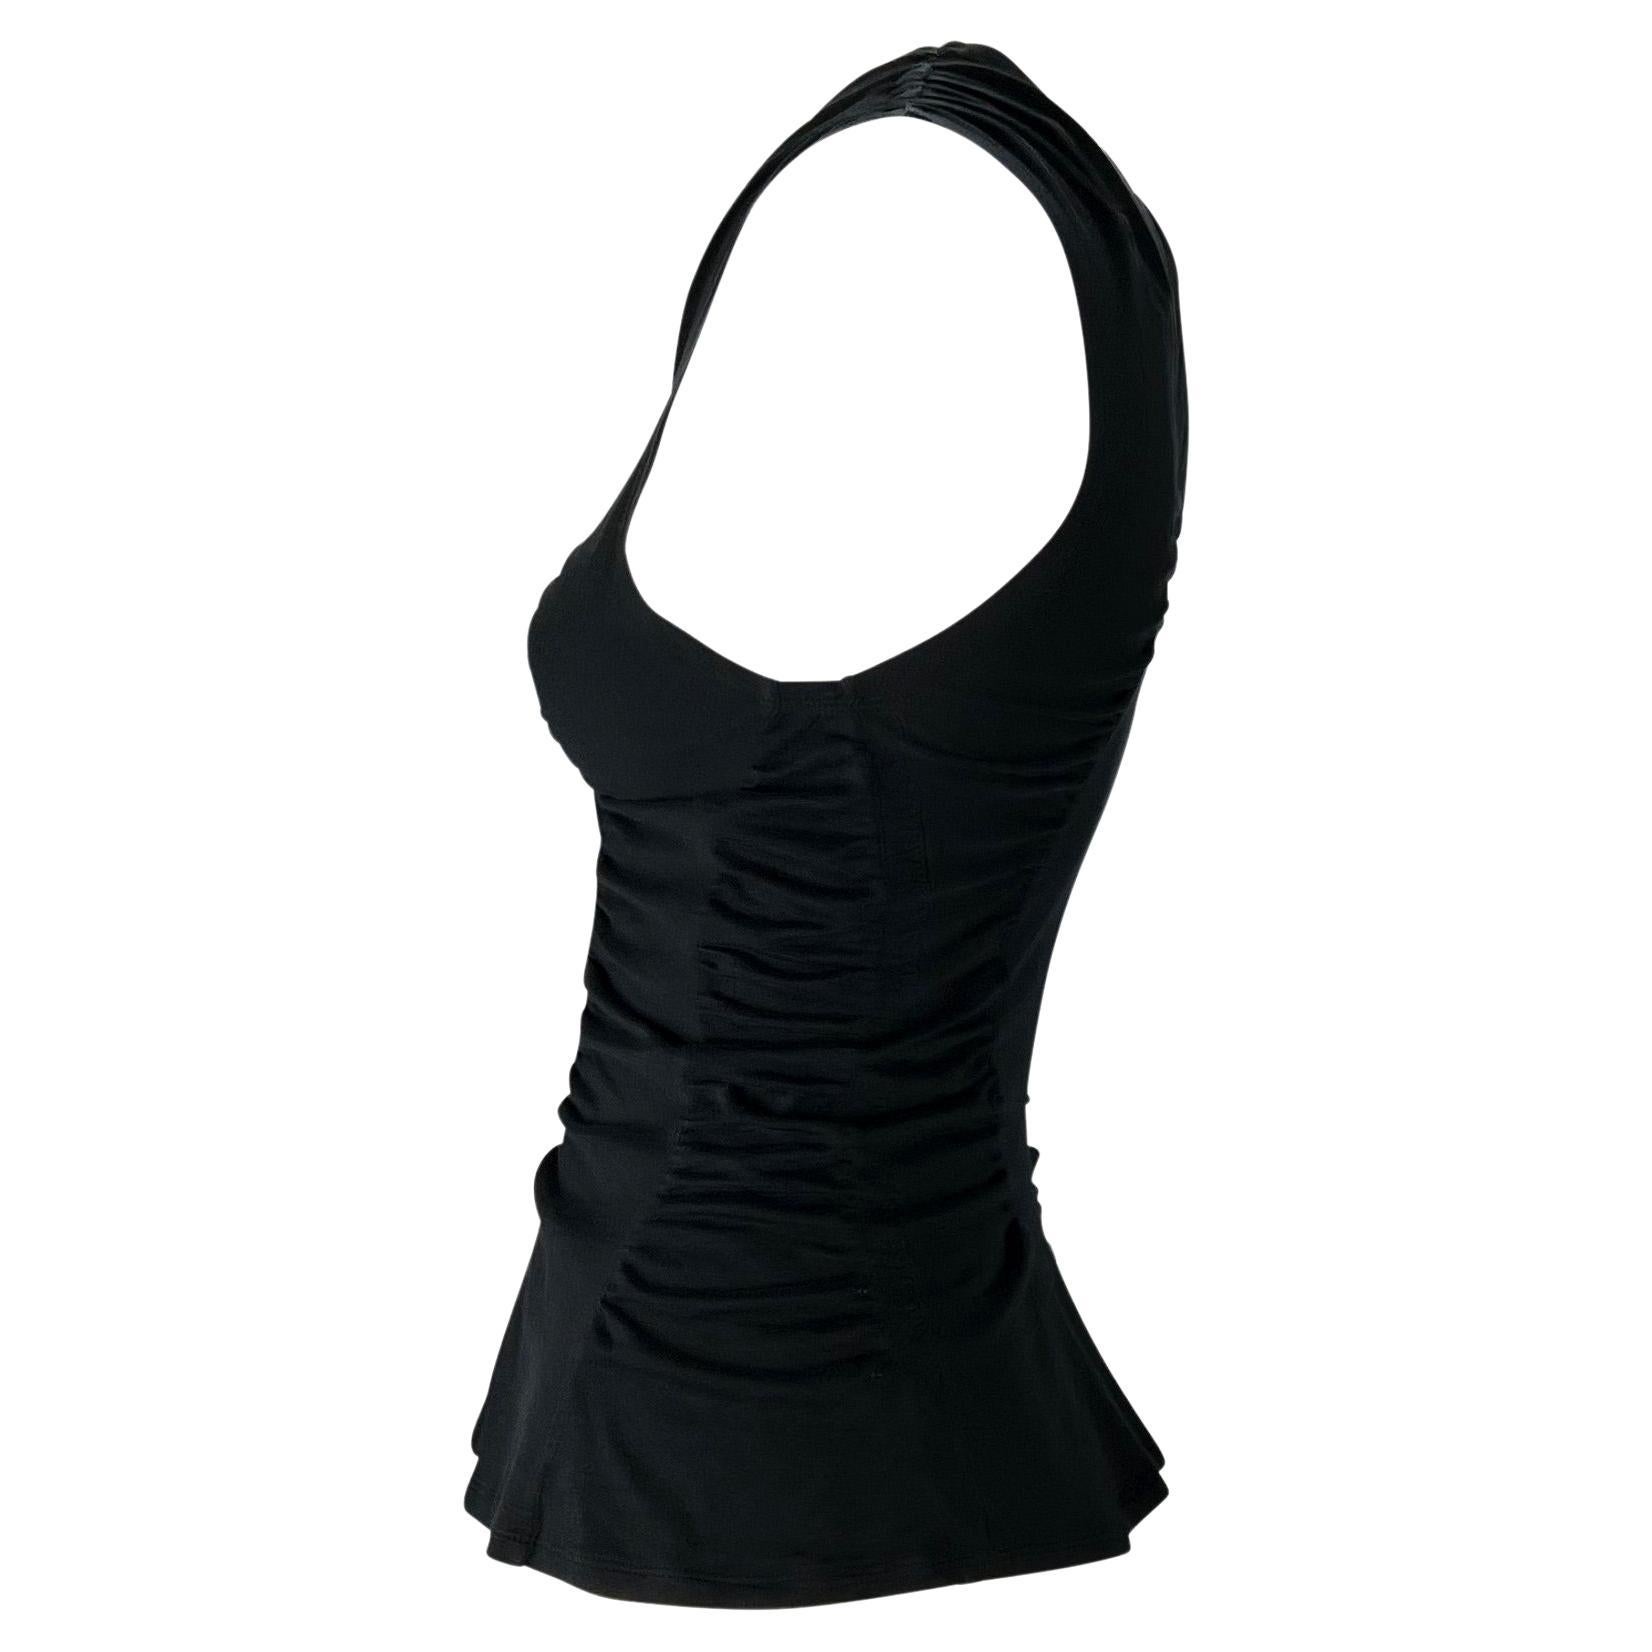 S/S 2003 Yves Saint Laurent by Tom Ford Black Ruched Cotton Tank Top In Good Condition For Sale In West Hollywood, CA